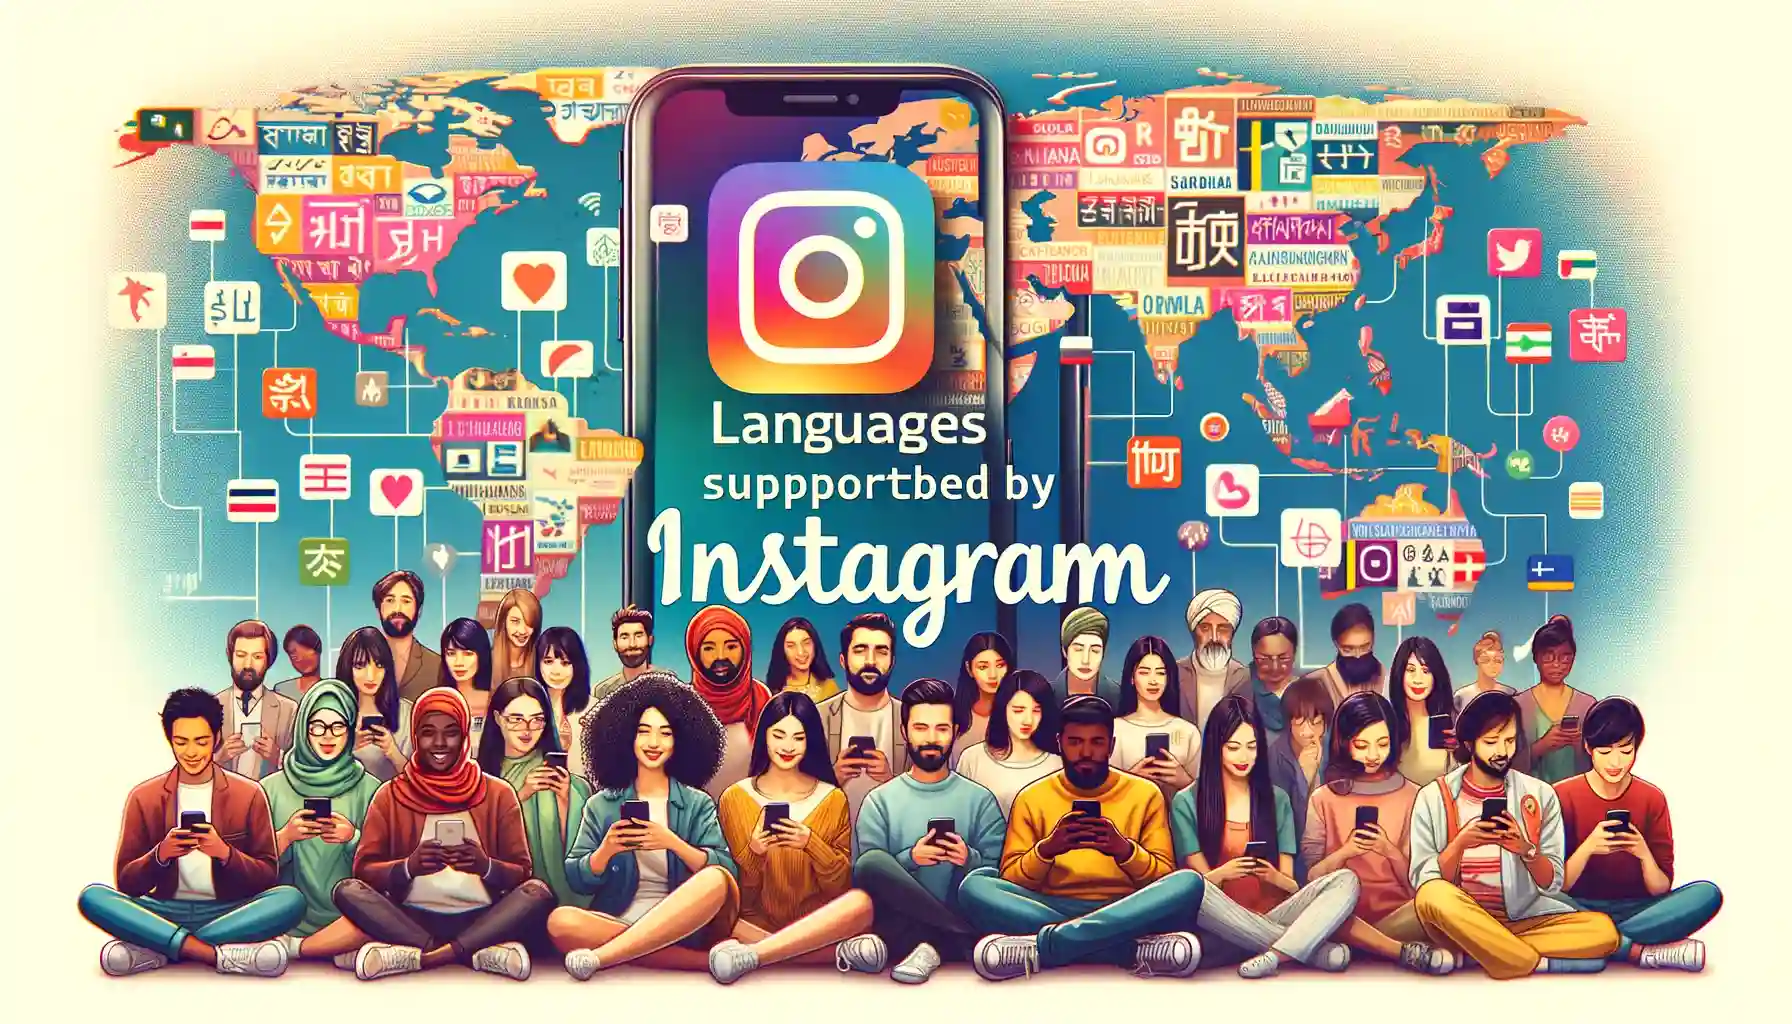 What are the Languages Supported by Instagram